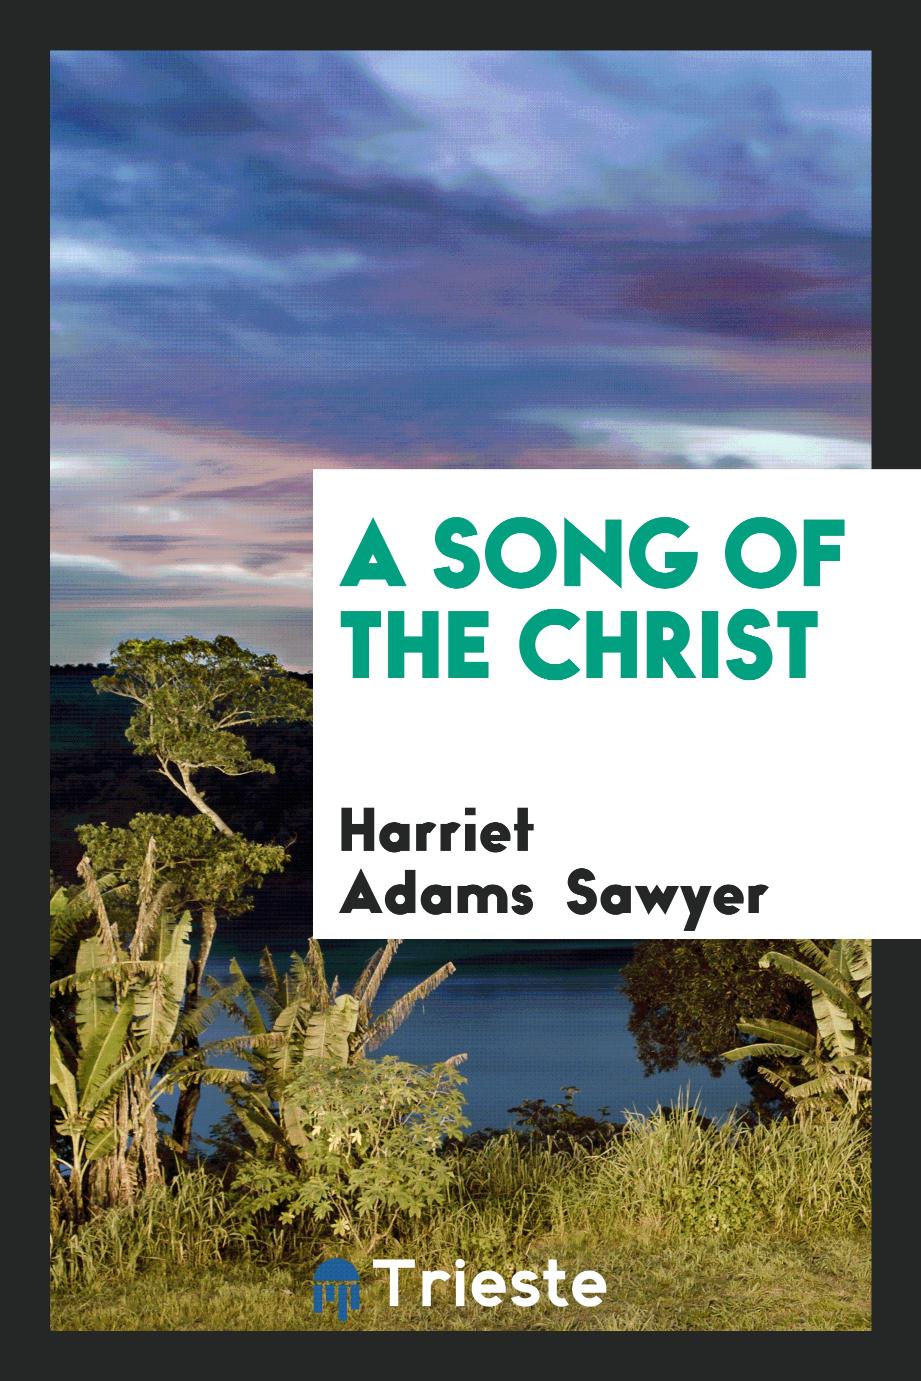 A Song of the Christ